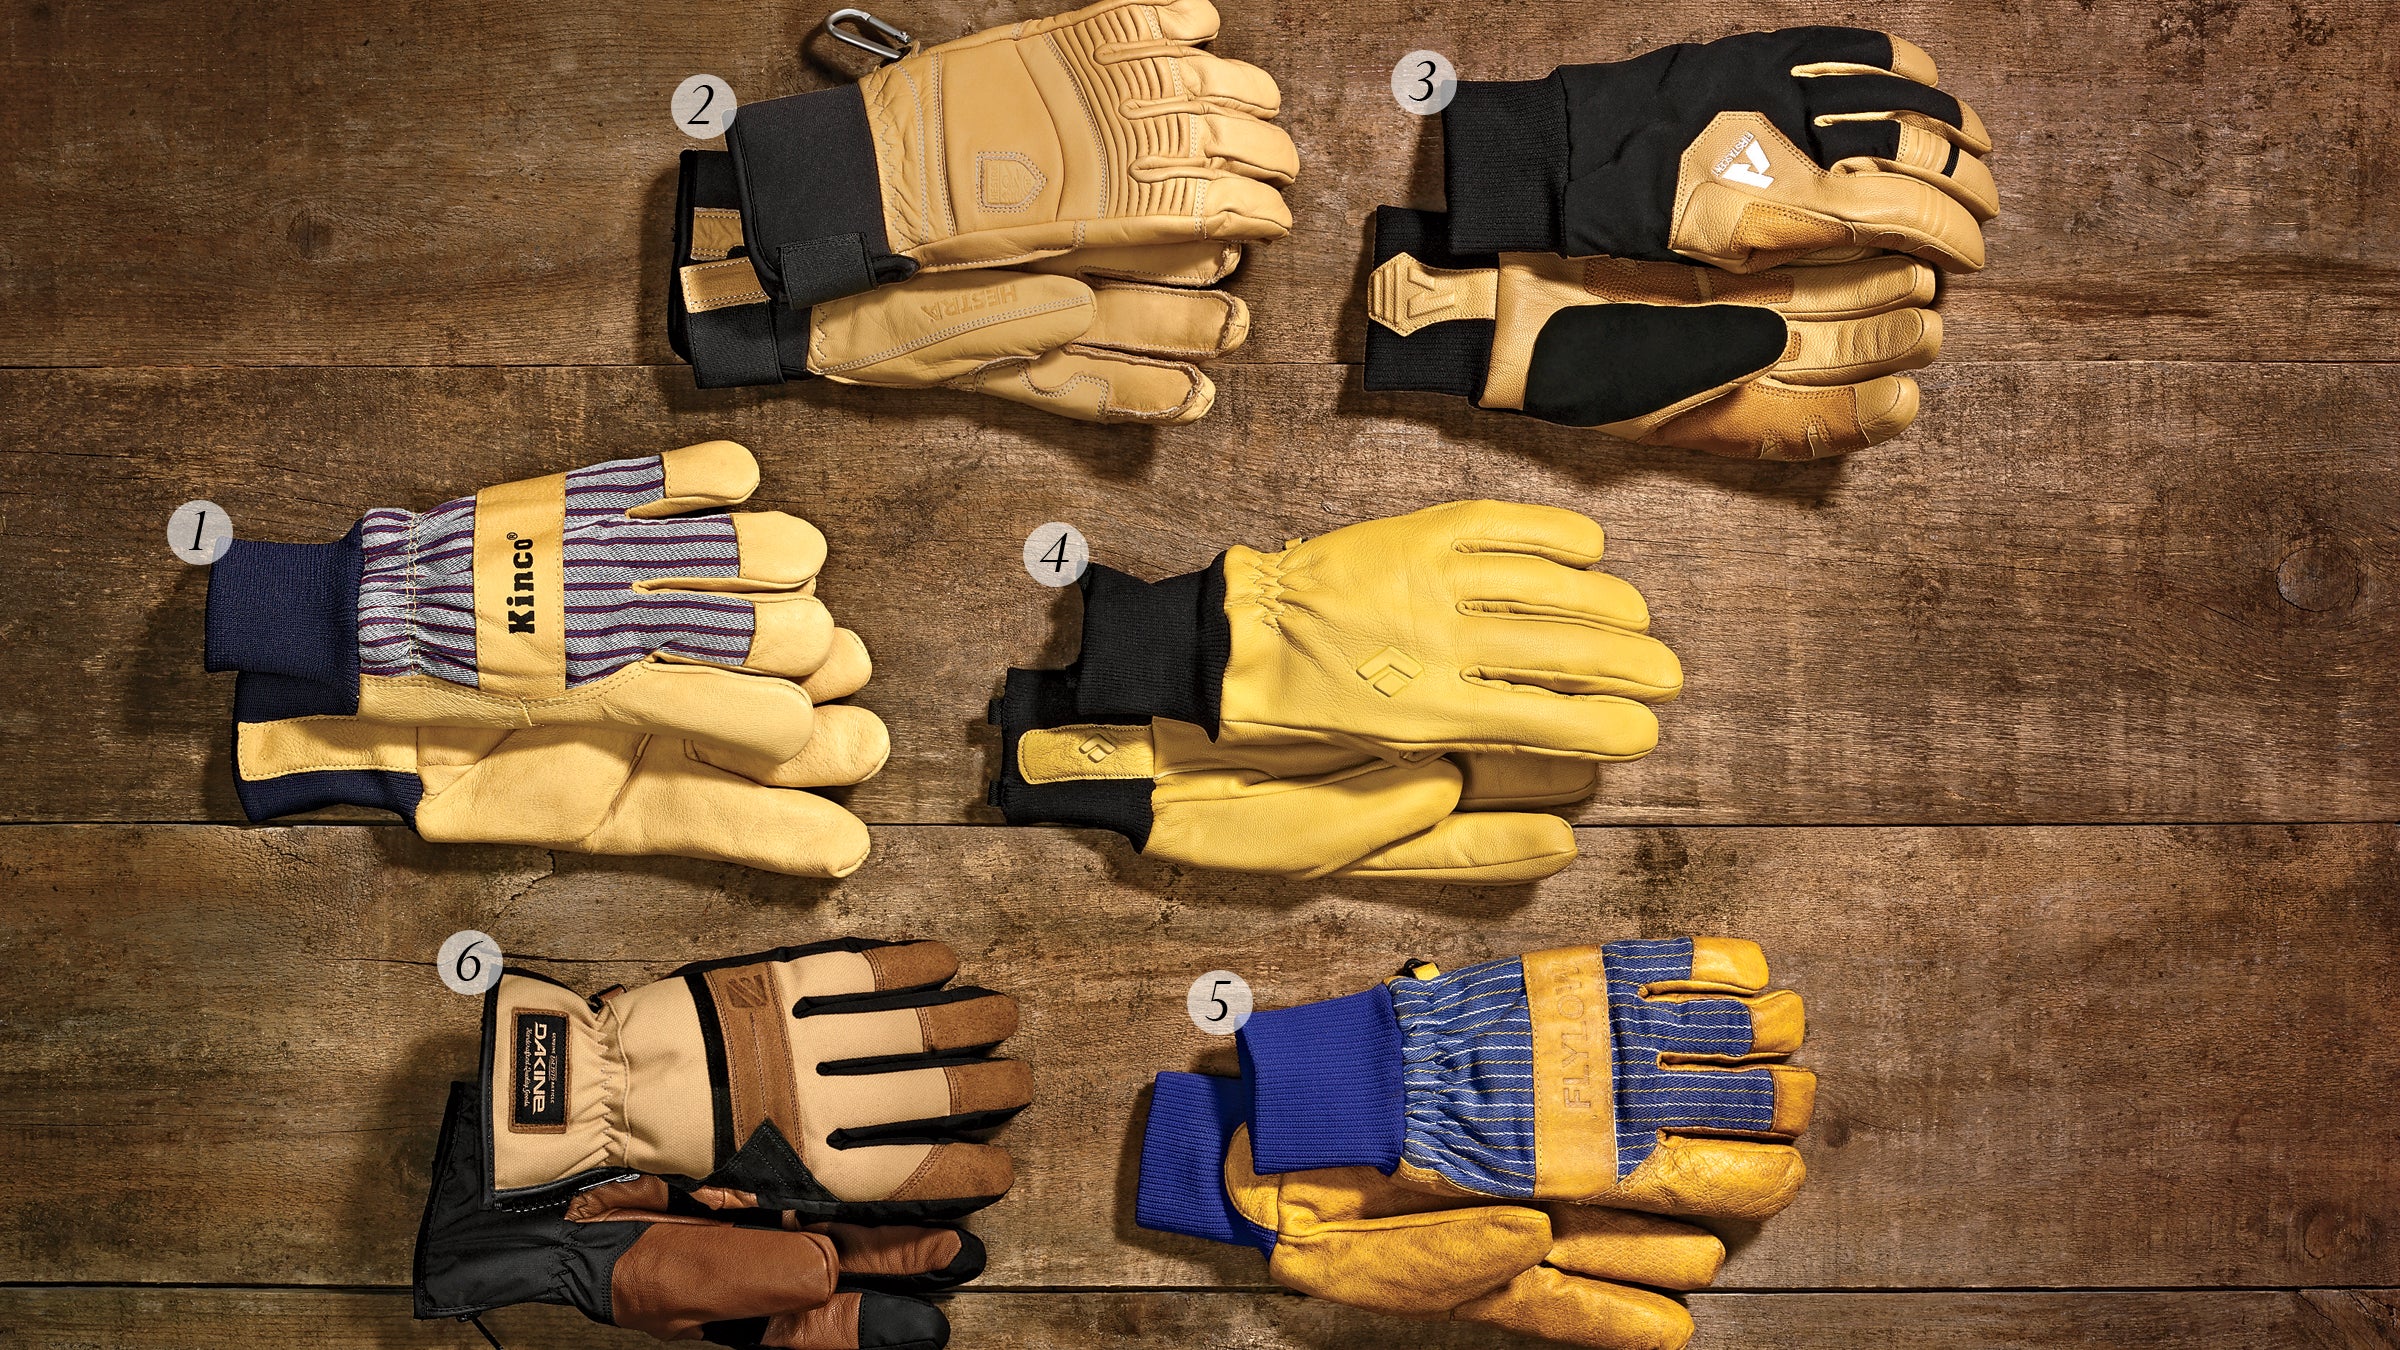 https://cdn.outsideonline.com/wp-content/uploads/migrated-images_parent/migrated-images_66/best-leather-work-gloves-winter_h.jpg